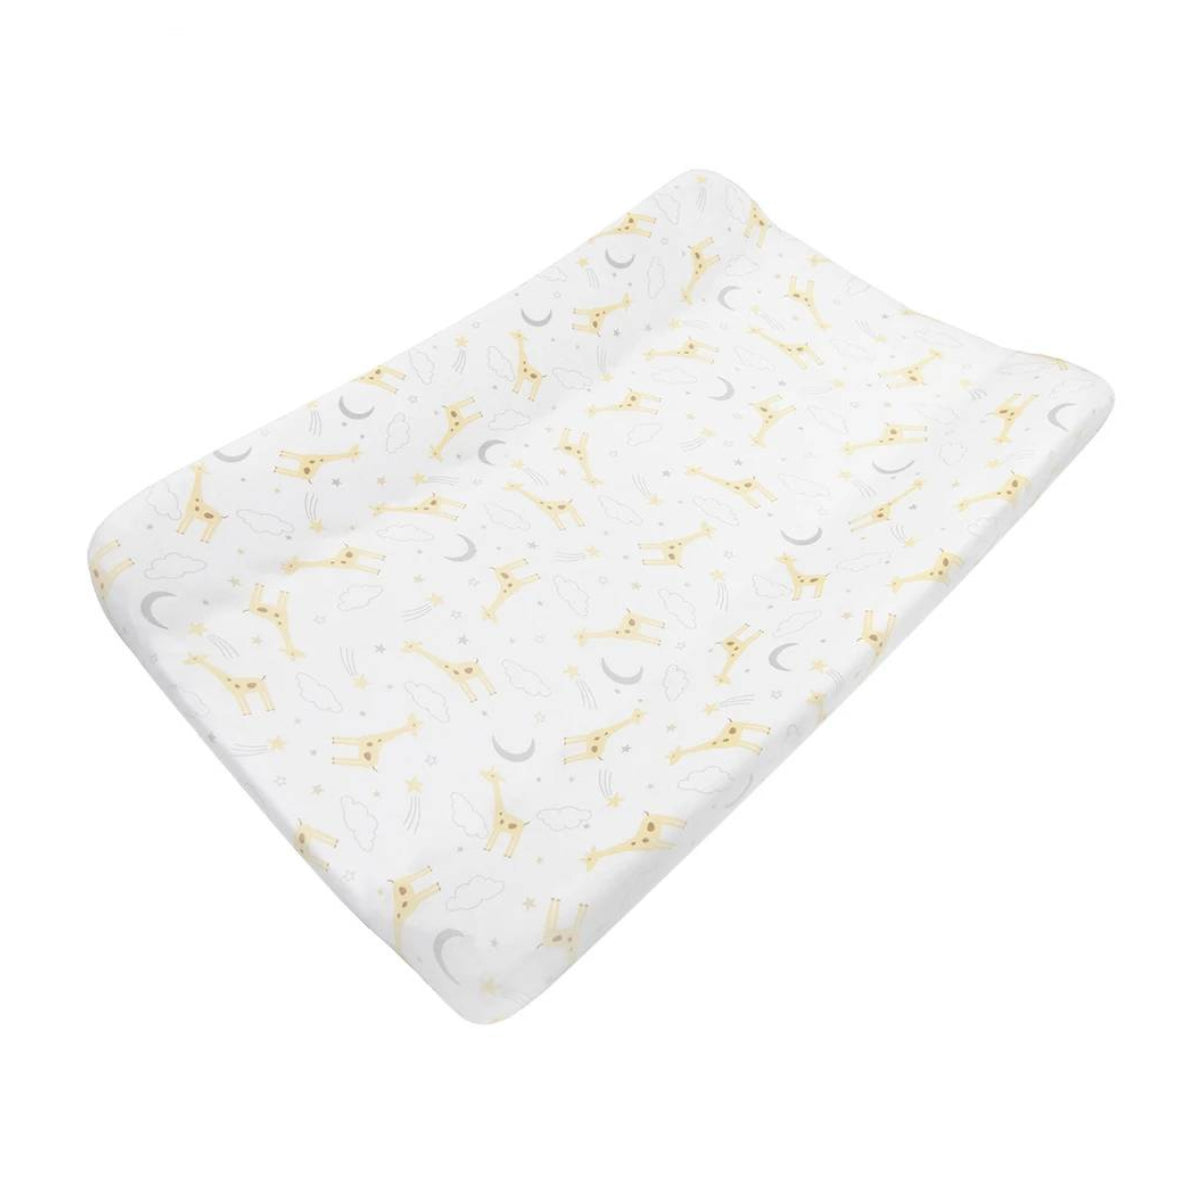 Baby Changing Mat Covers